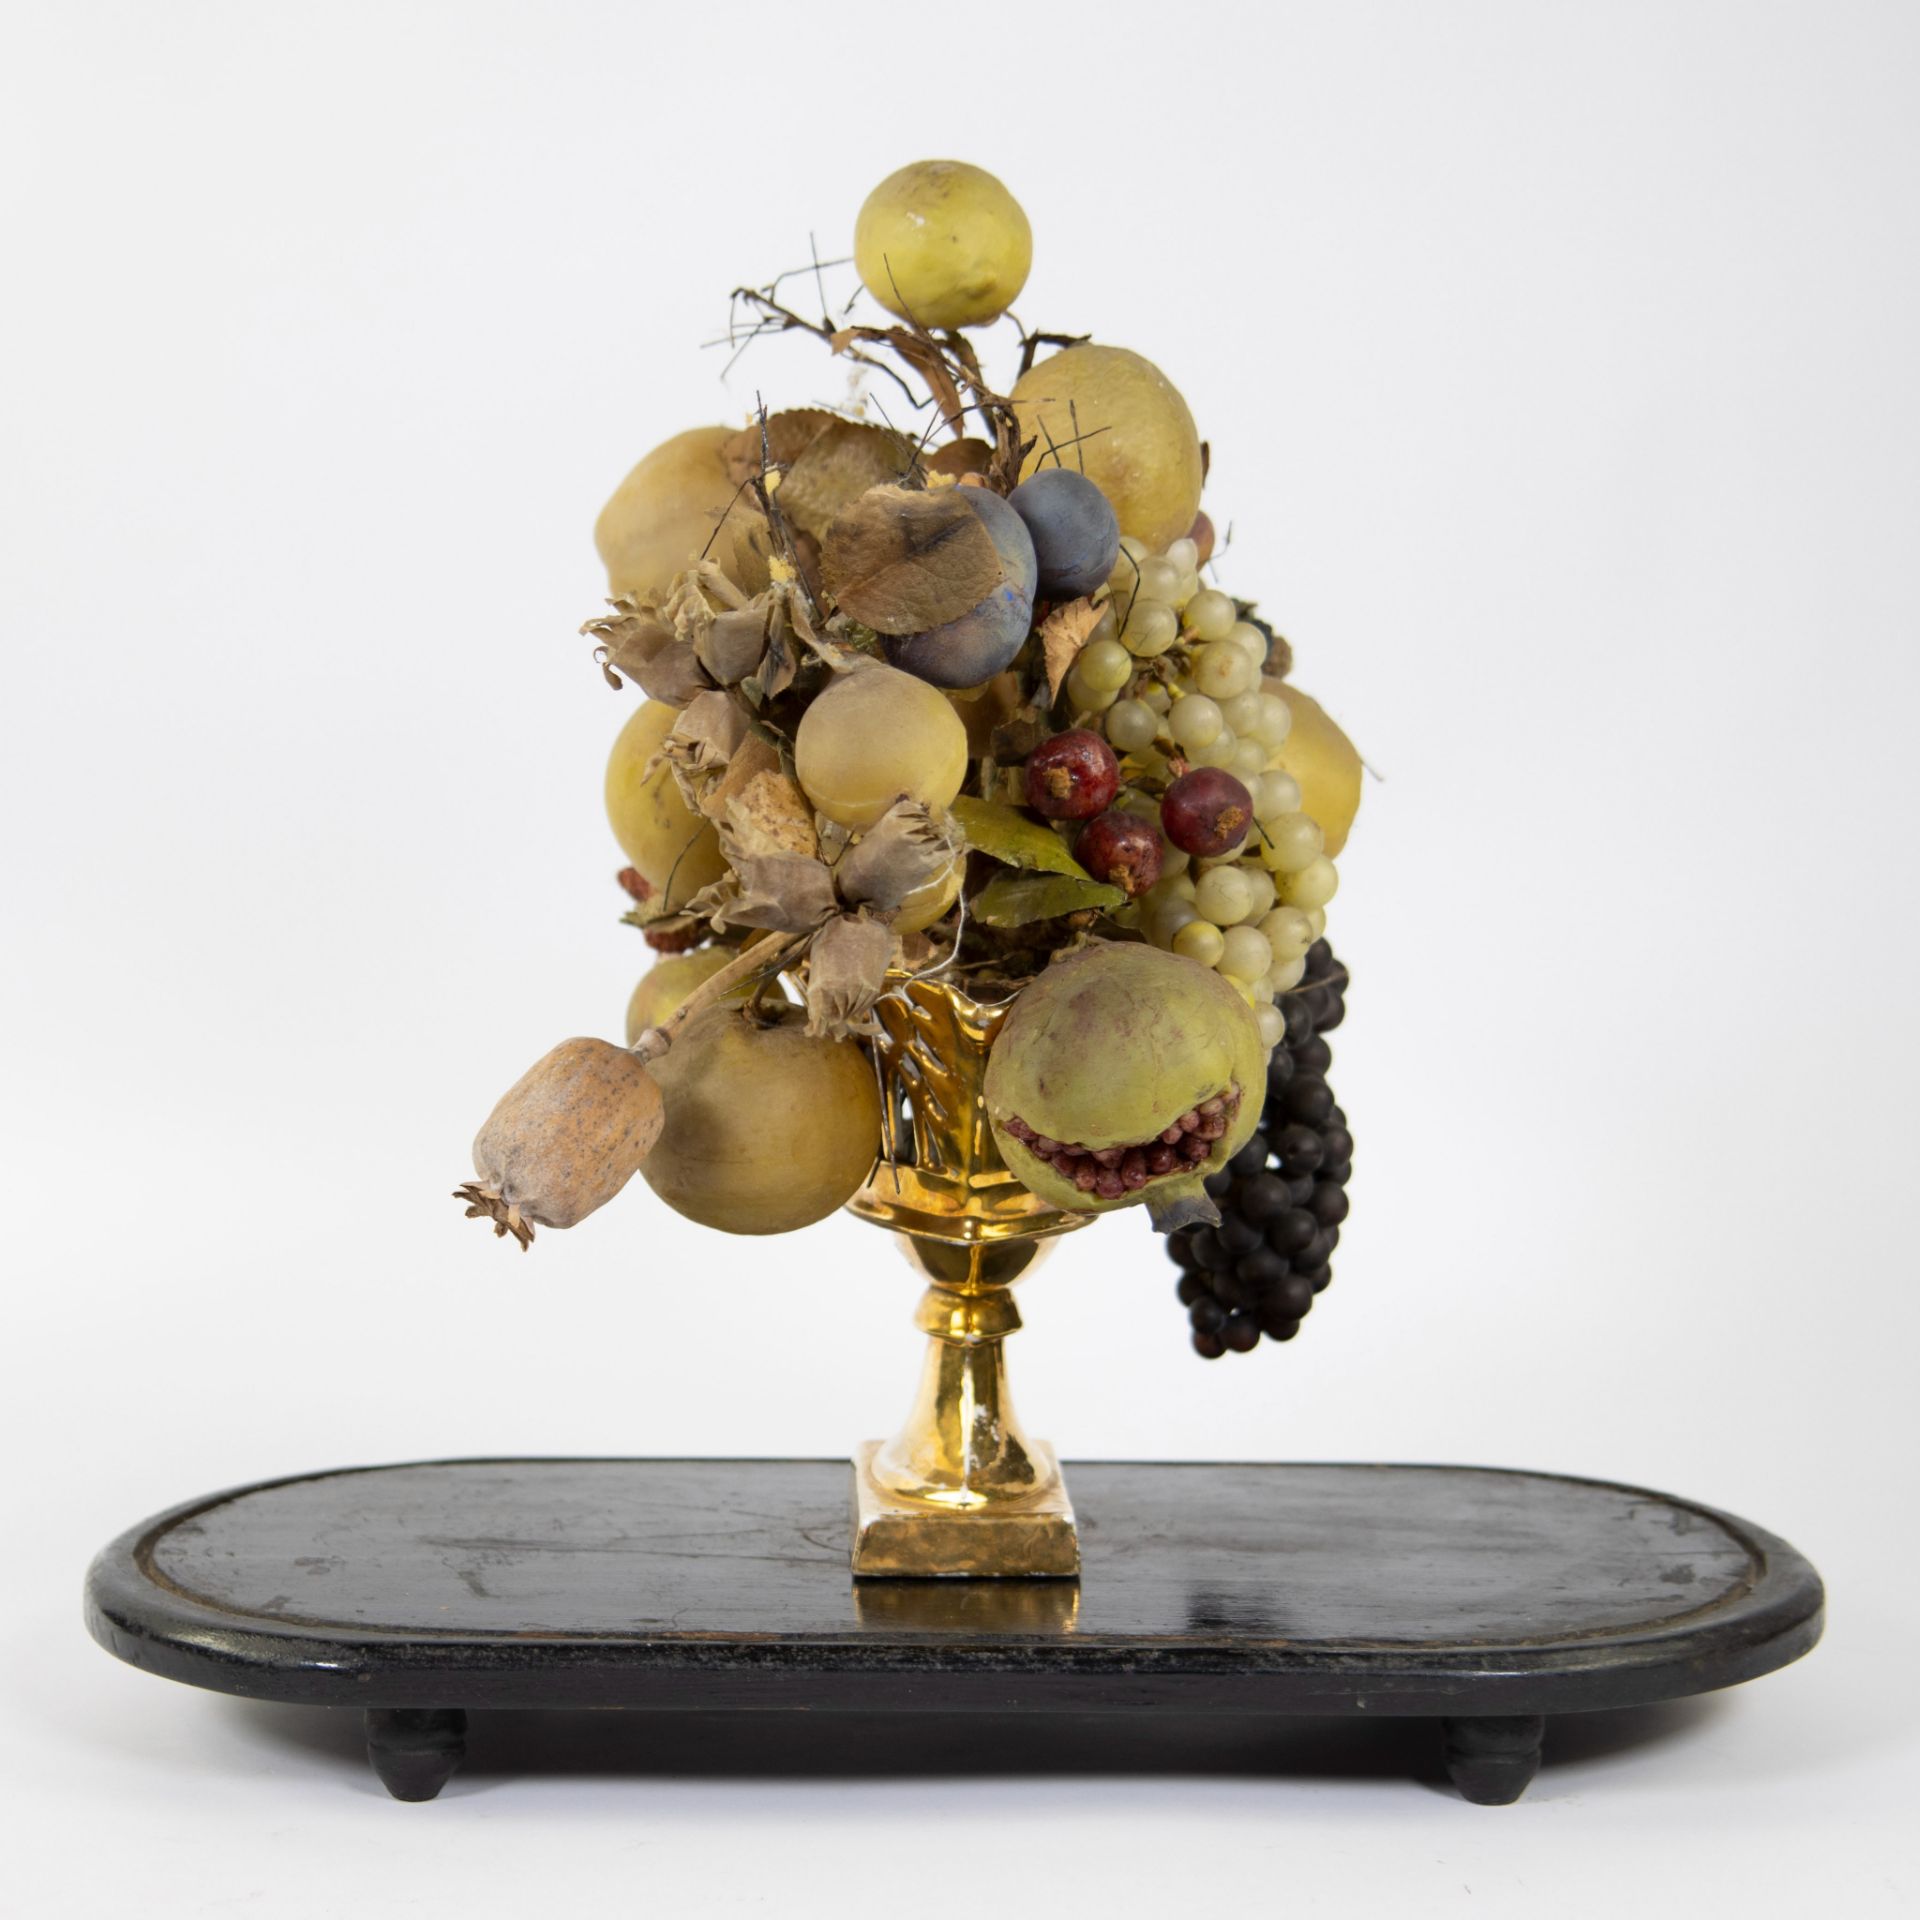 Openwork gilded porcelain basket with ornamental fruit under a glass dome - Image 5 of 5